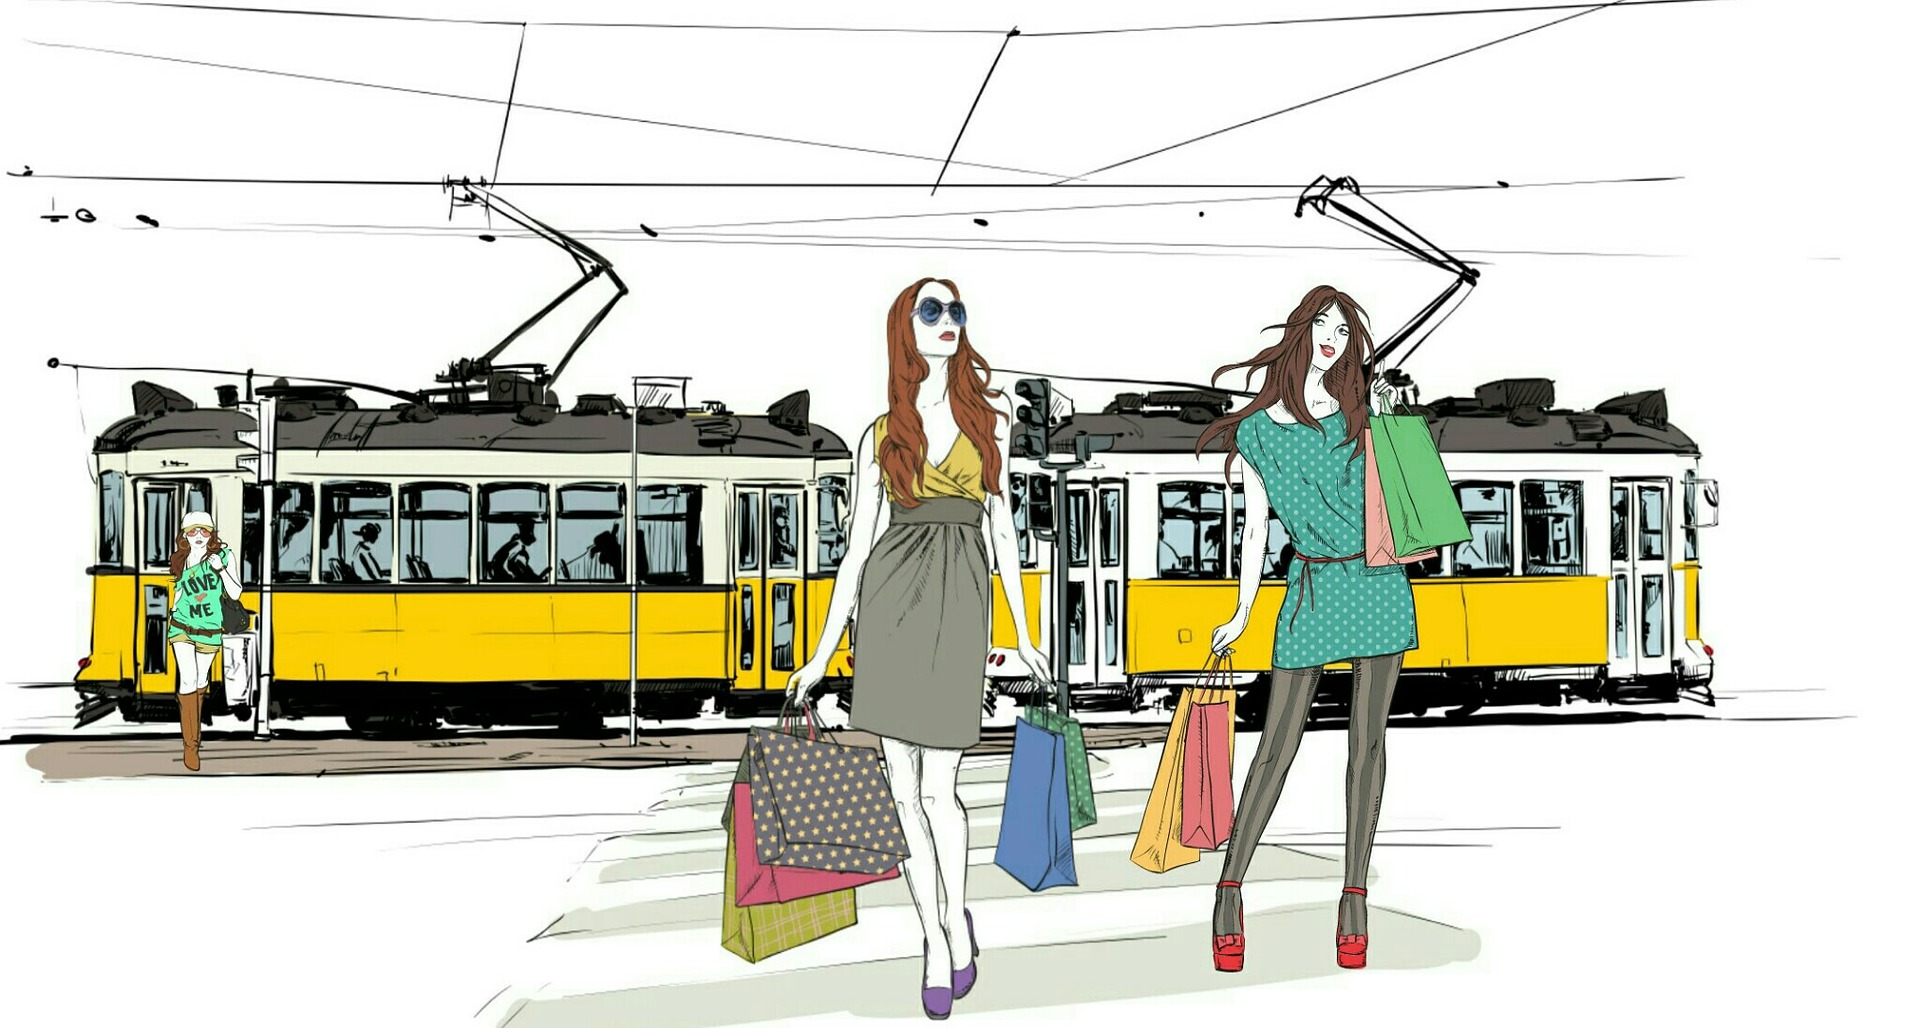 Girls get out of a street car with bags full of purchases